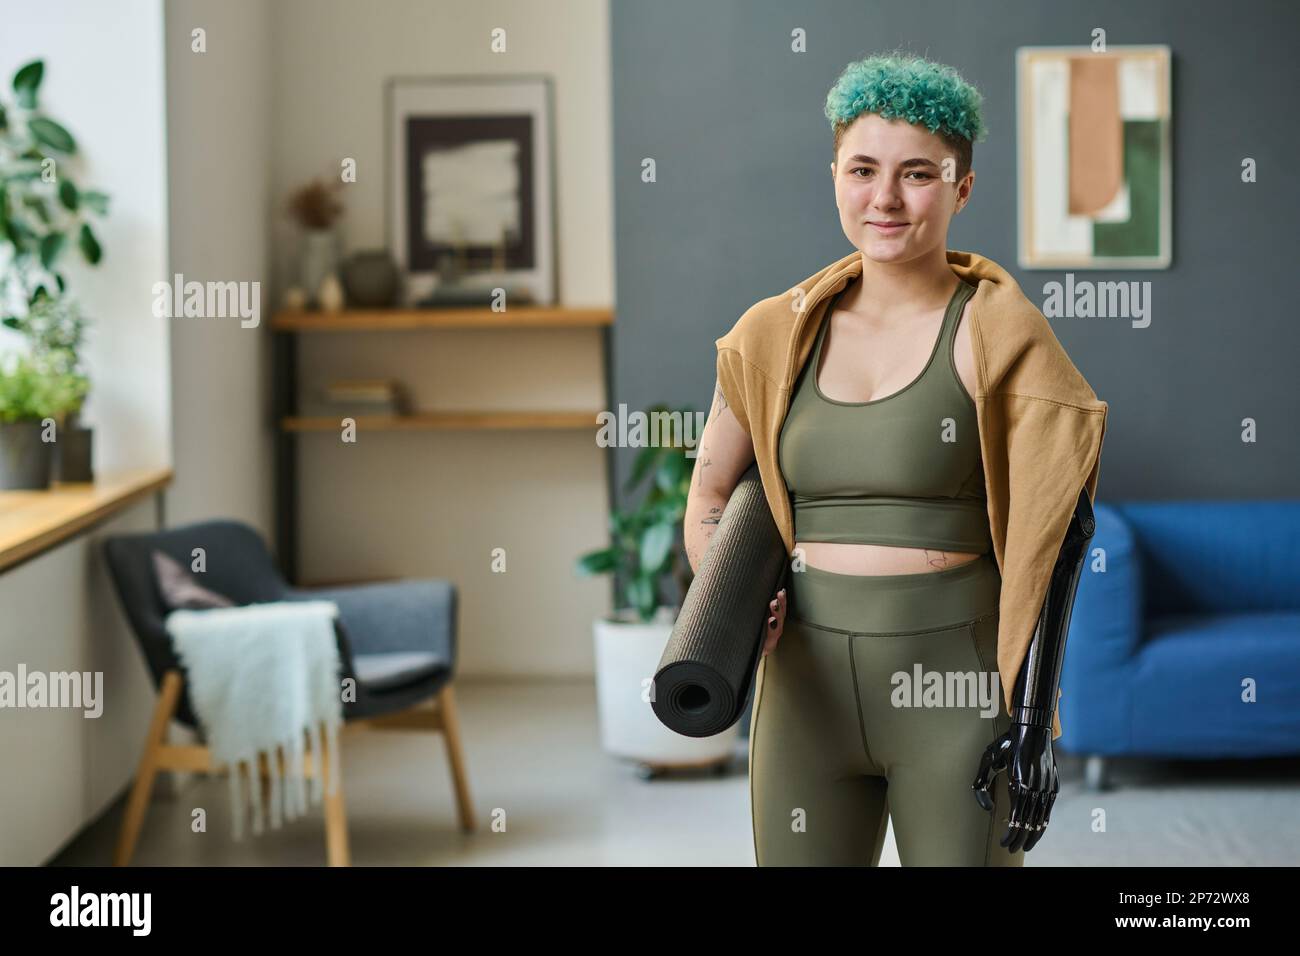 Portrait of young woman with prosthetic arm holding exercise mat for yoga and looking at camera while standing in the room Stock Photo